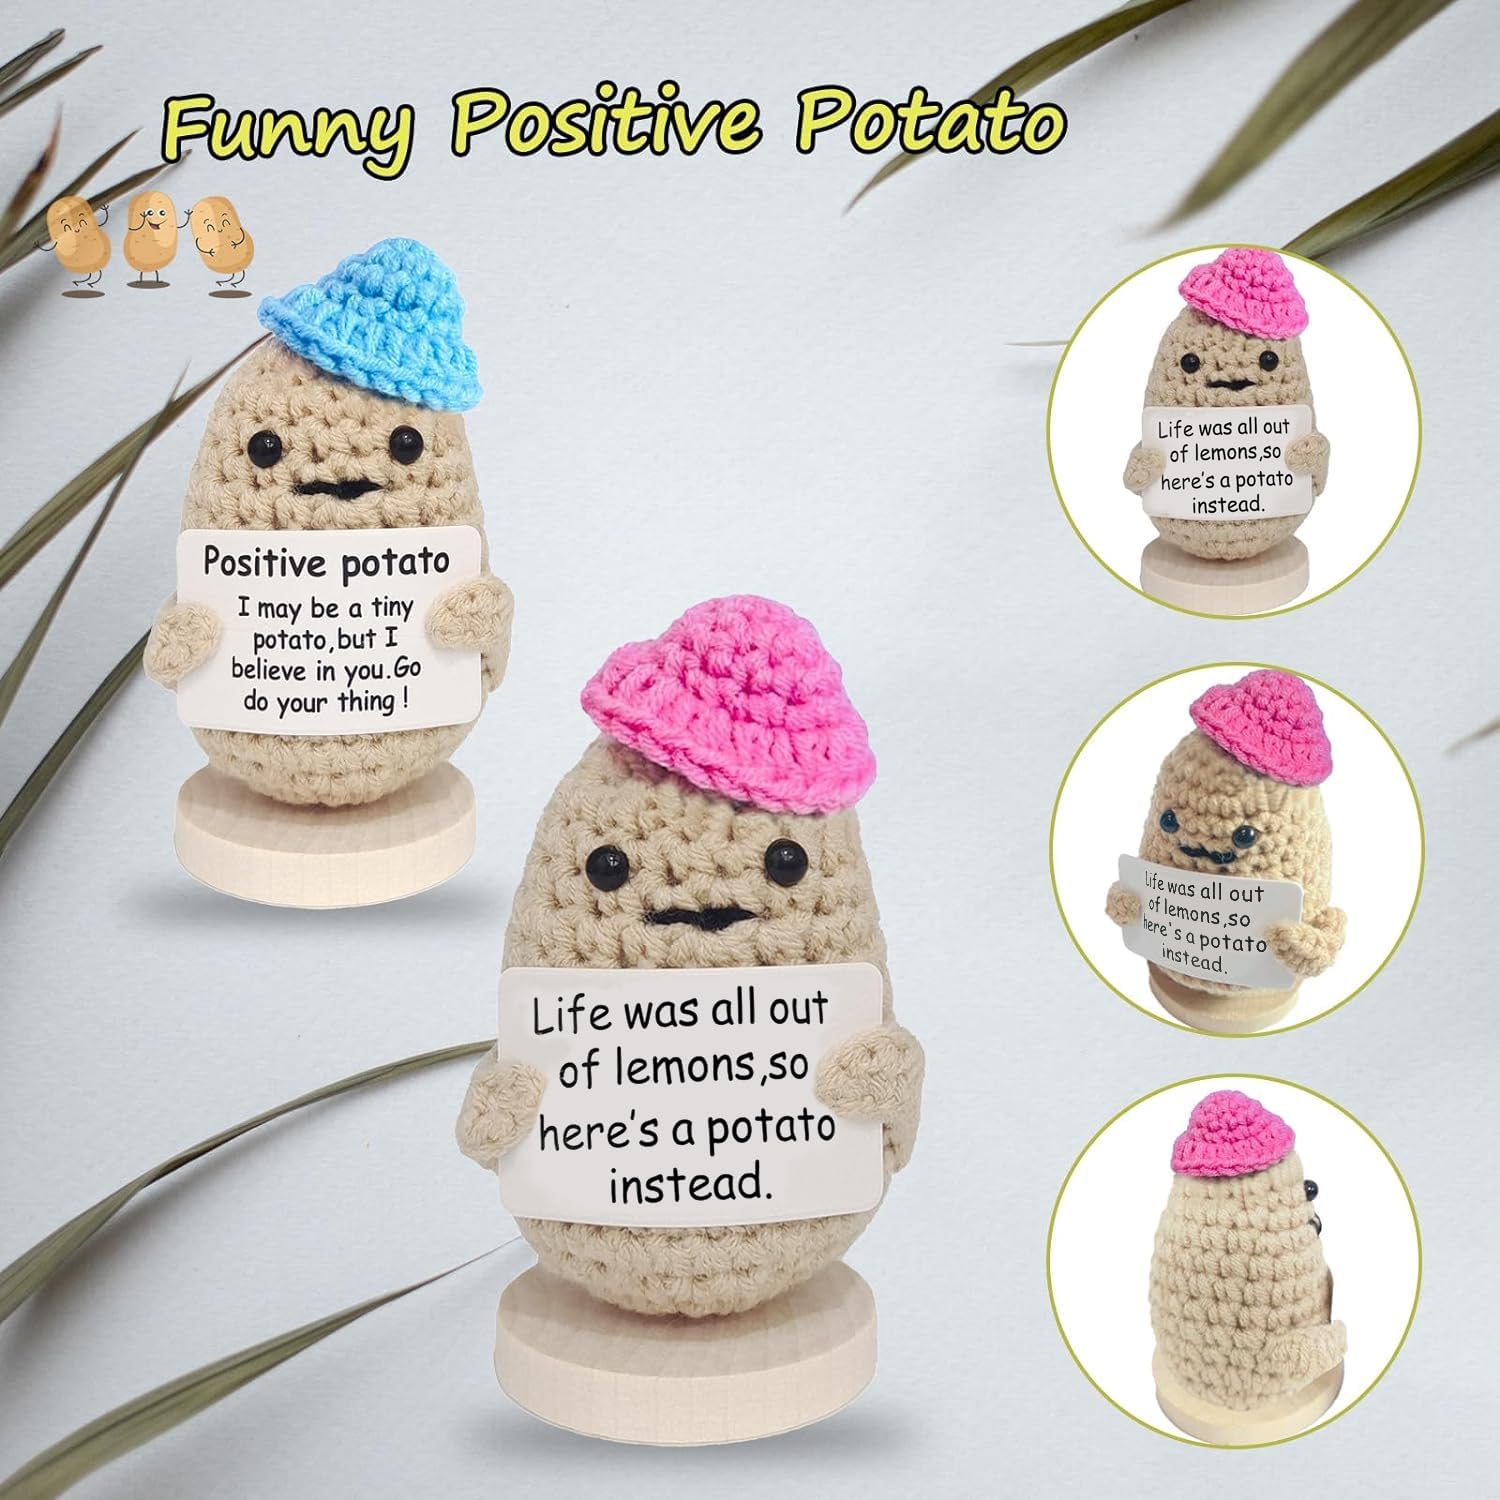  Positive Potato Bulk Emotional Support Potato with Positive  Cards and Bags, Cute Handmade Crochet Doll Toy, Inspirational Gifts for  Friends Birthday Christmas Party Decorations 20-Sets : Home & Kitchen